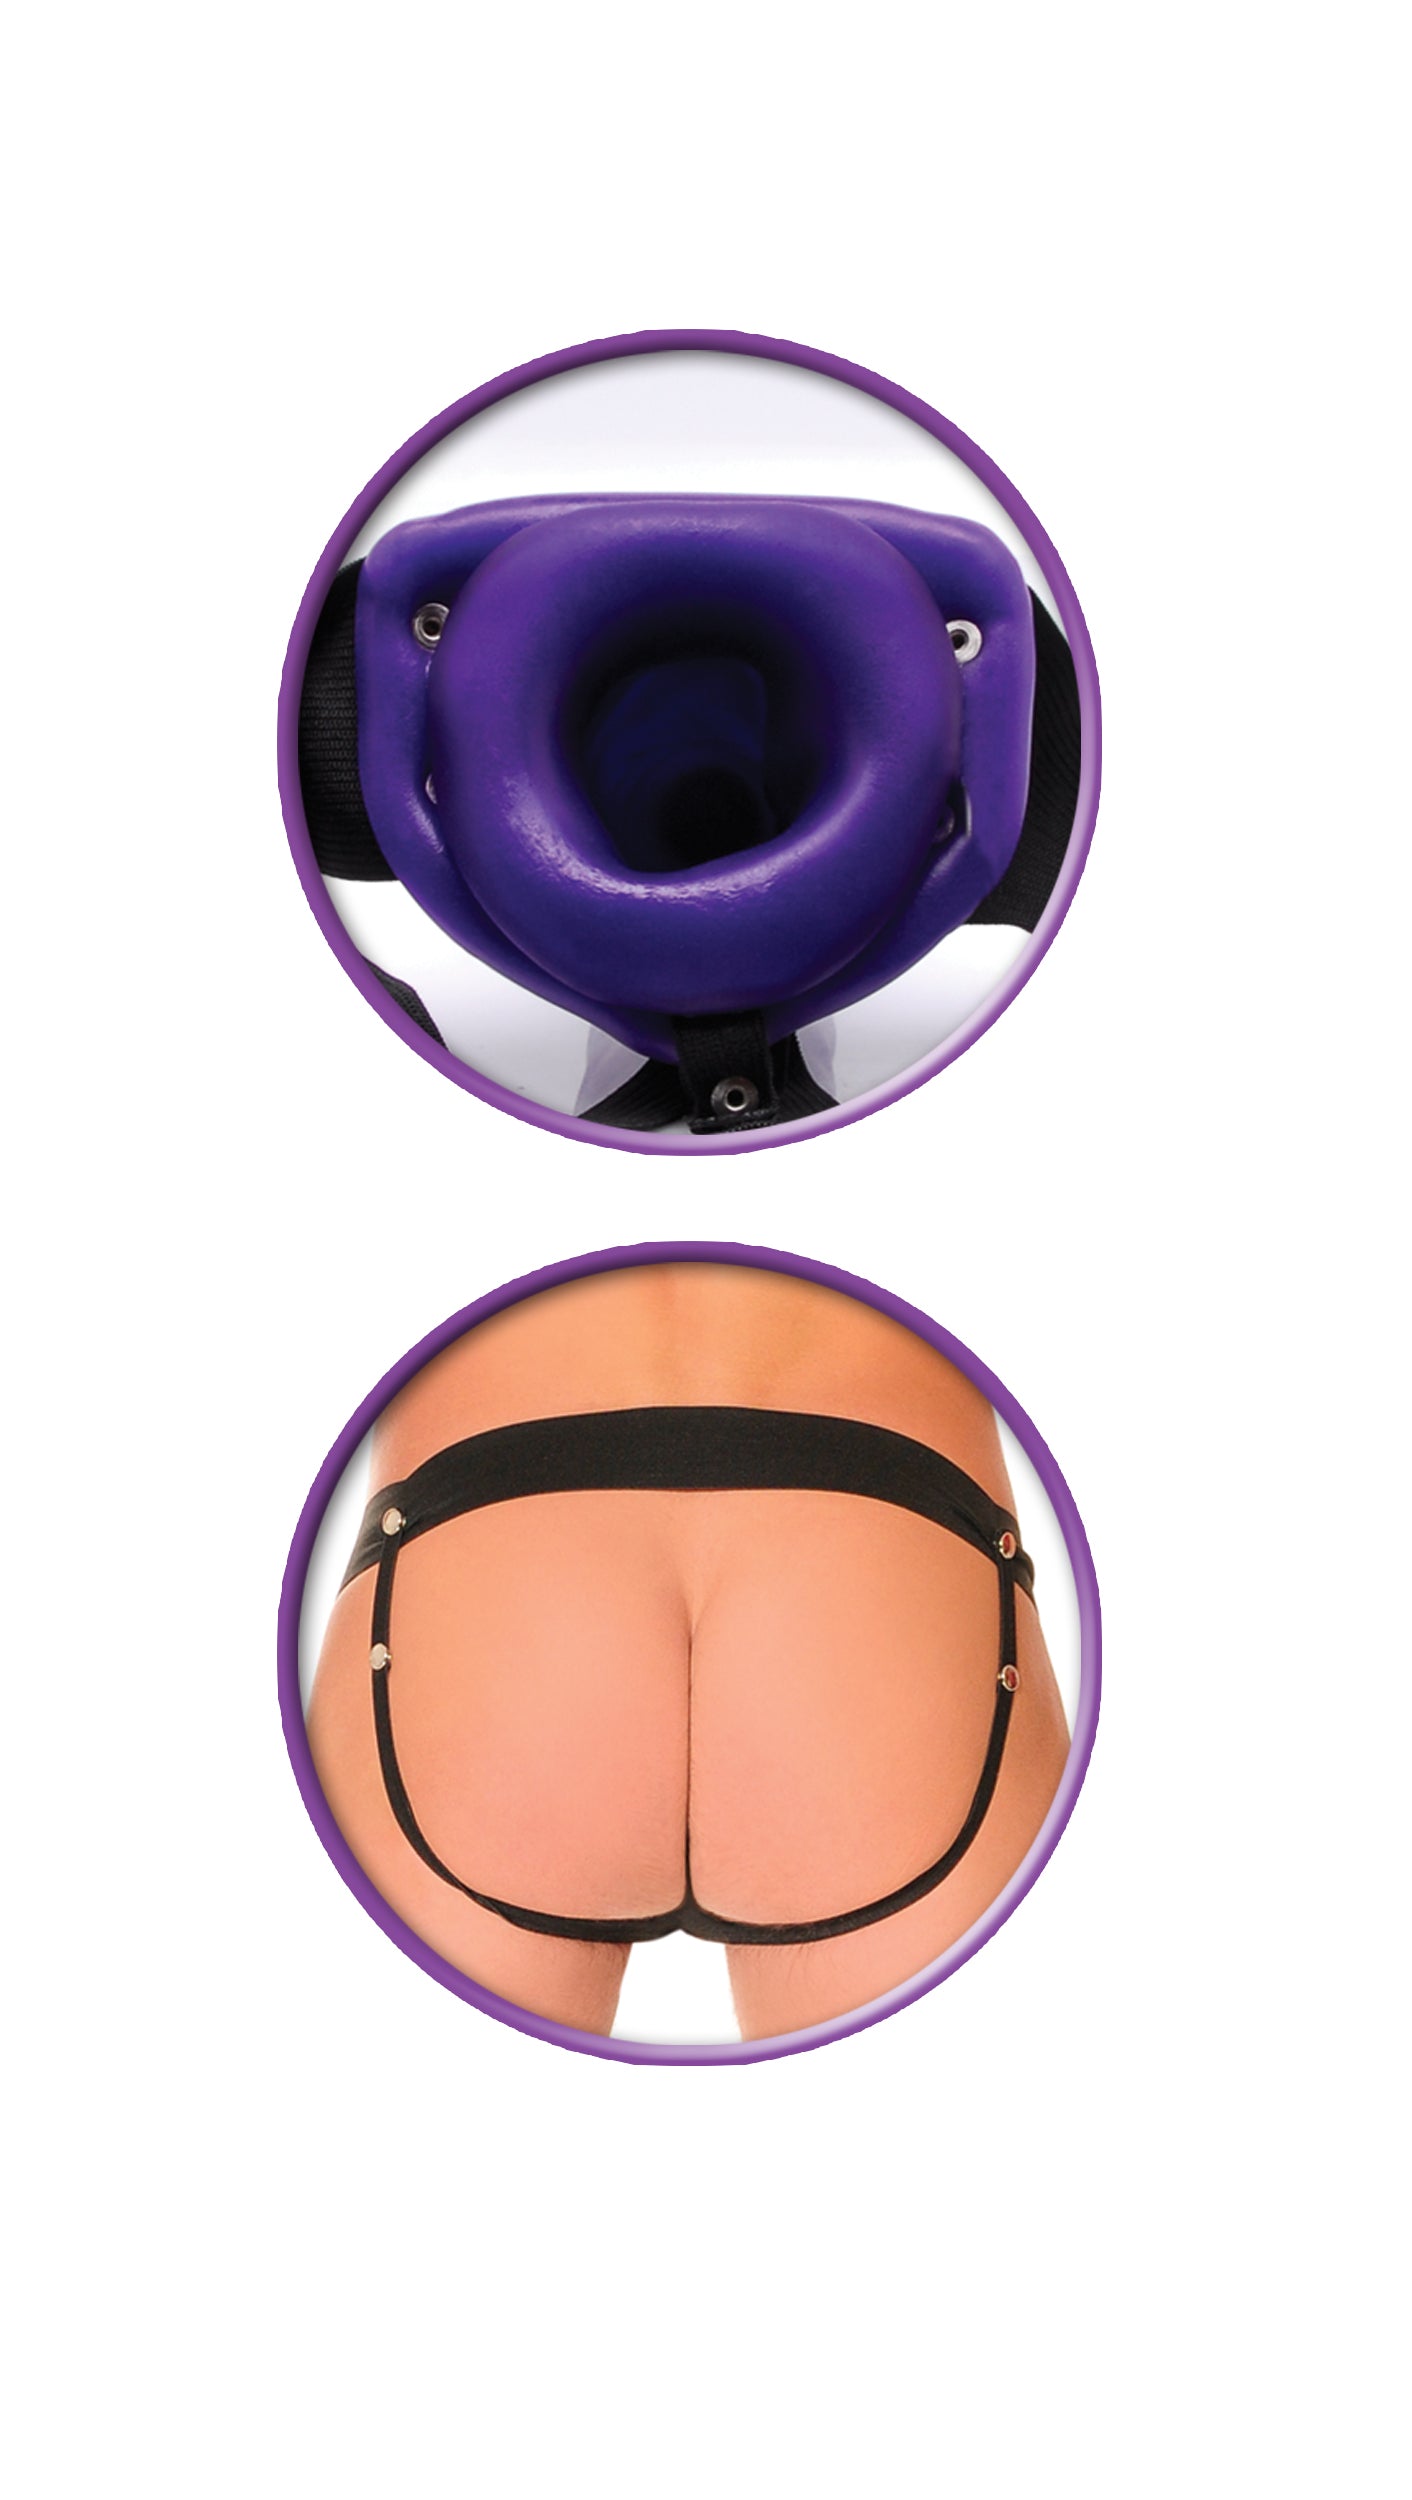 Fetish Fantasy Series for Him or Her Hollow Strap-on - Purple-0